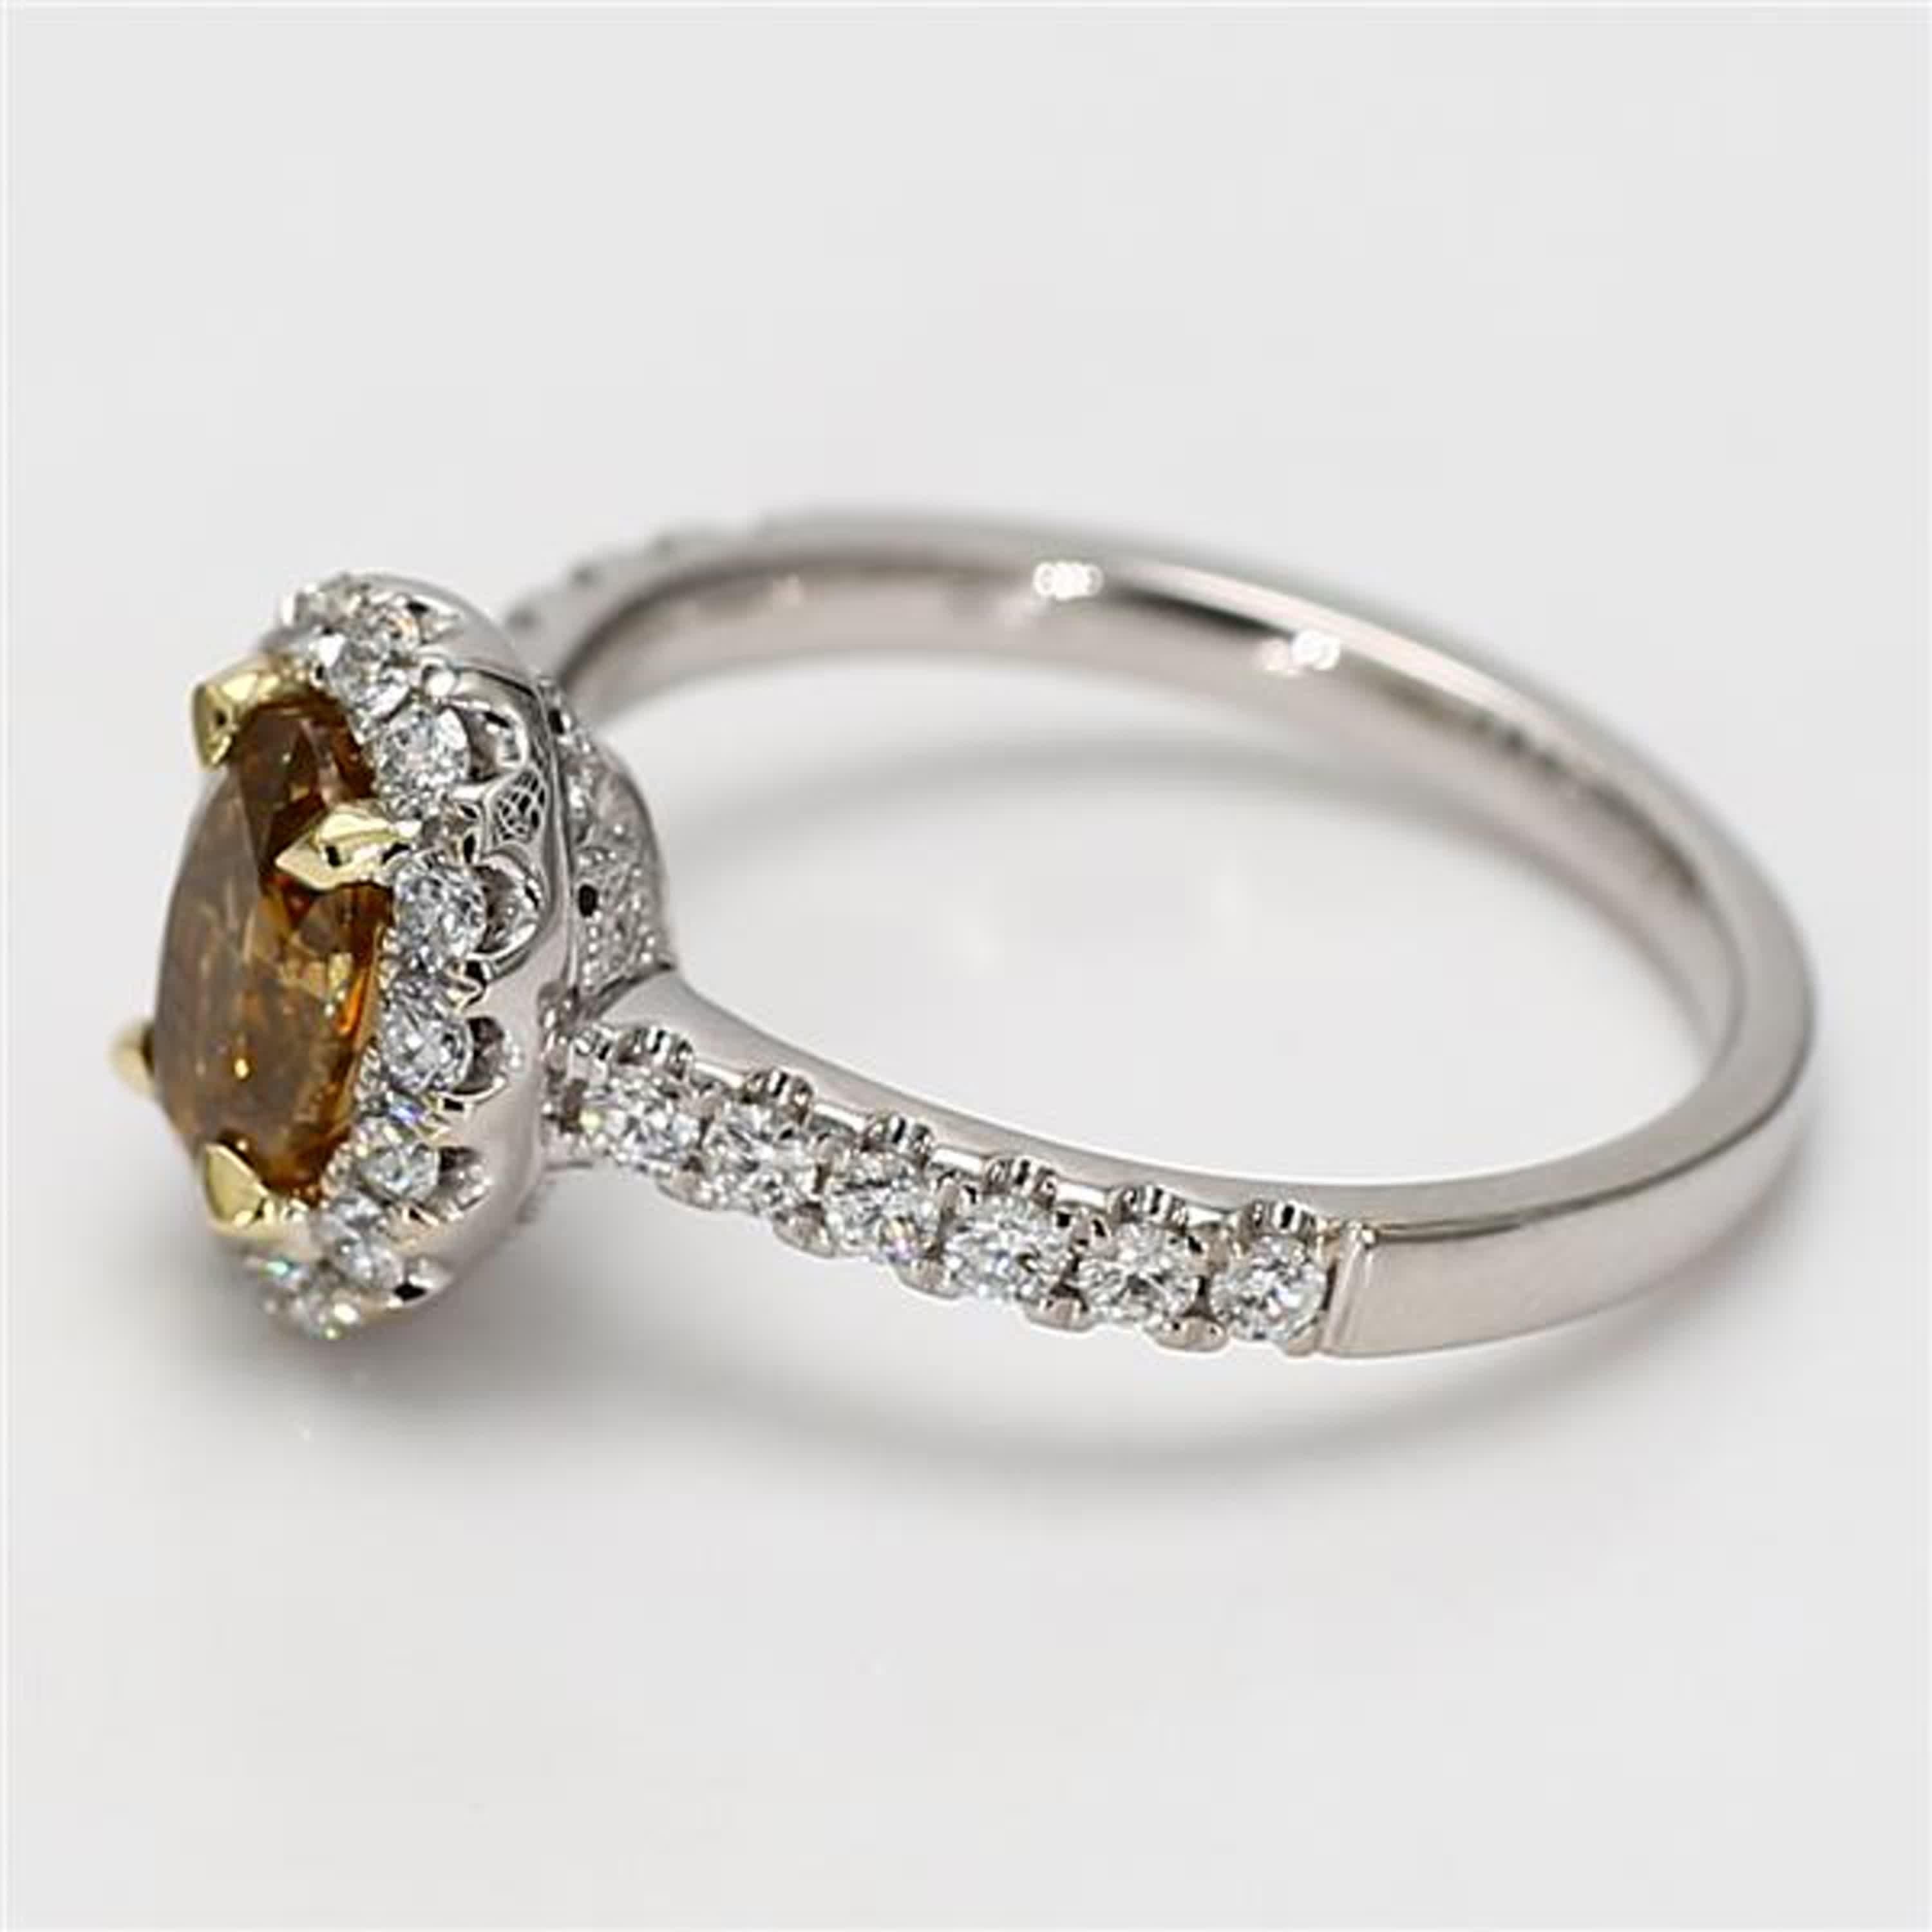 RareGemWorld's classic GIA certified diamond ring. Mounted in a beautiful 18K Yellow and White Gold setting with a natural oval cut yellow diamond. The yellow diamond is surrounded by small round natural white diamond melee. This ring is guaranteed